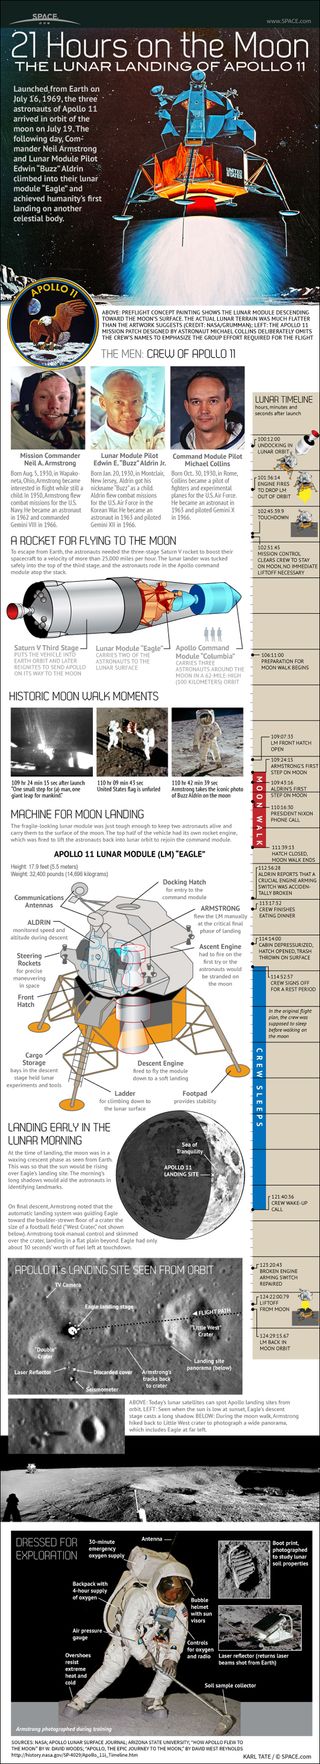 NASA's historic Apollo 11 moon mission landed the first astronauts on the lunar surface on July 20, 1969. See how the mission worked in this Space.com infographic.